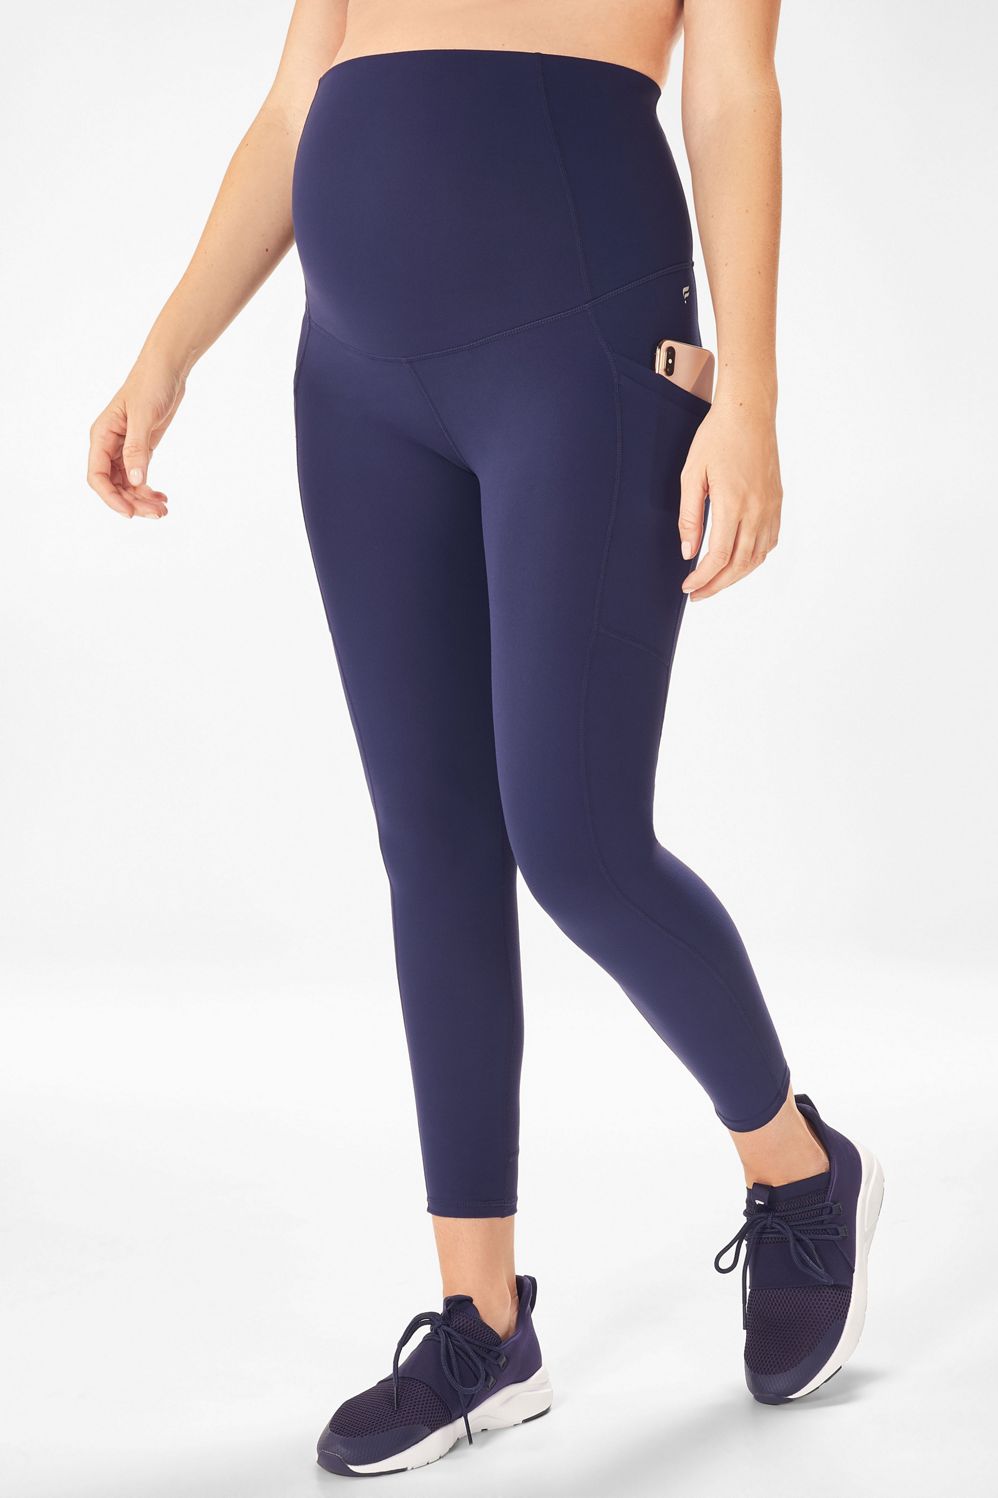 New Fabletics Maternity Collection: Bestsellers Designed With Mamas In  Mind! - Hello Subscription